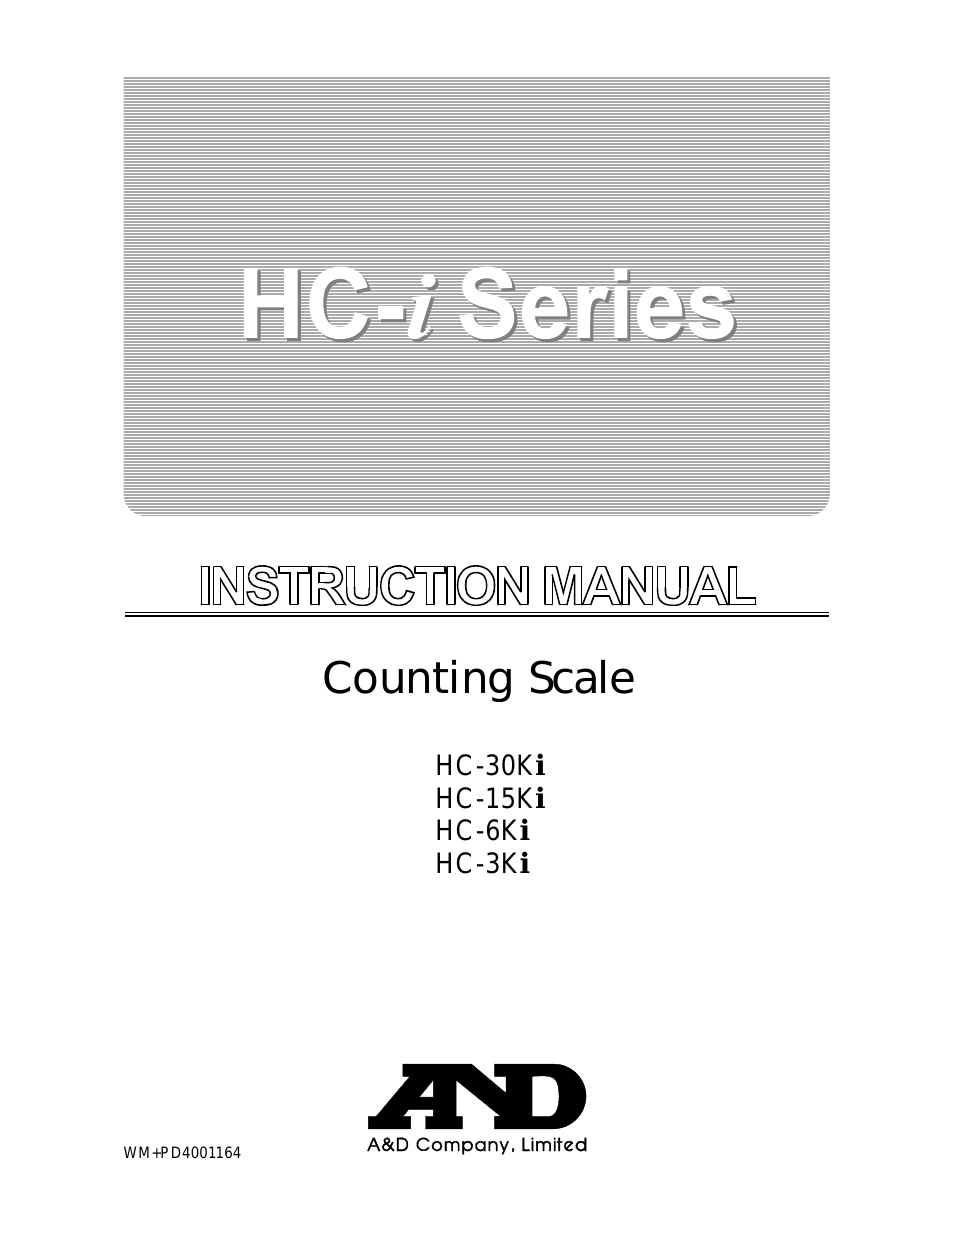 Counting Scale HC-3Ki (Page 1)